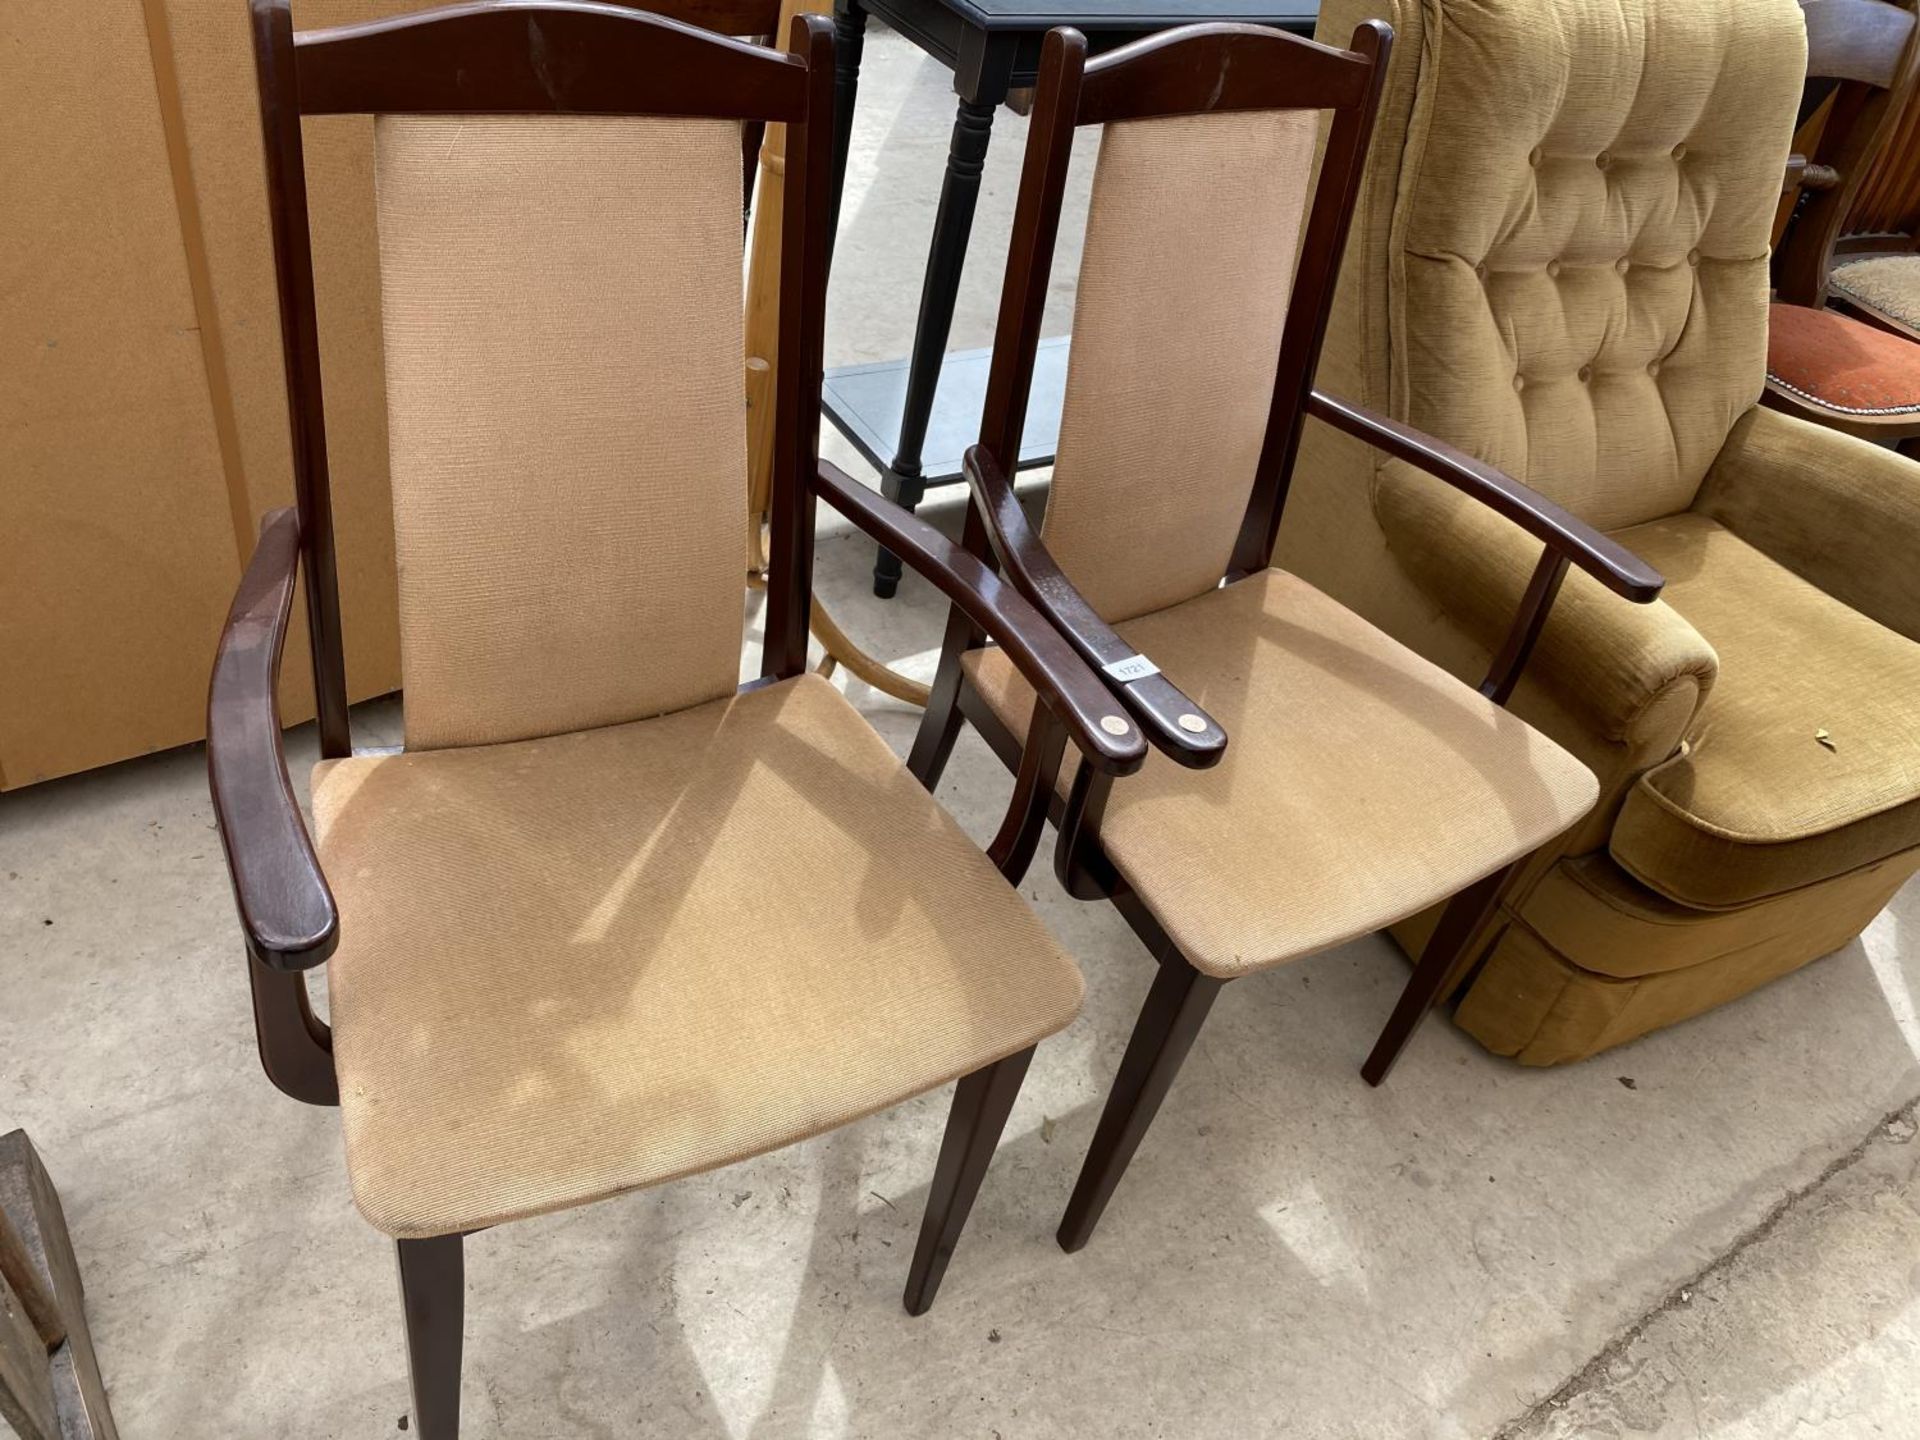 TWO MAHOGANY CARVER DINING CHAIRS